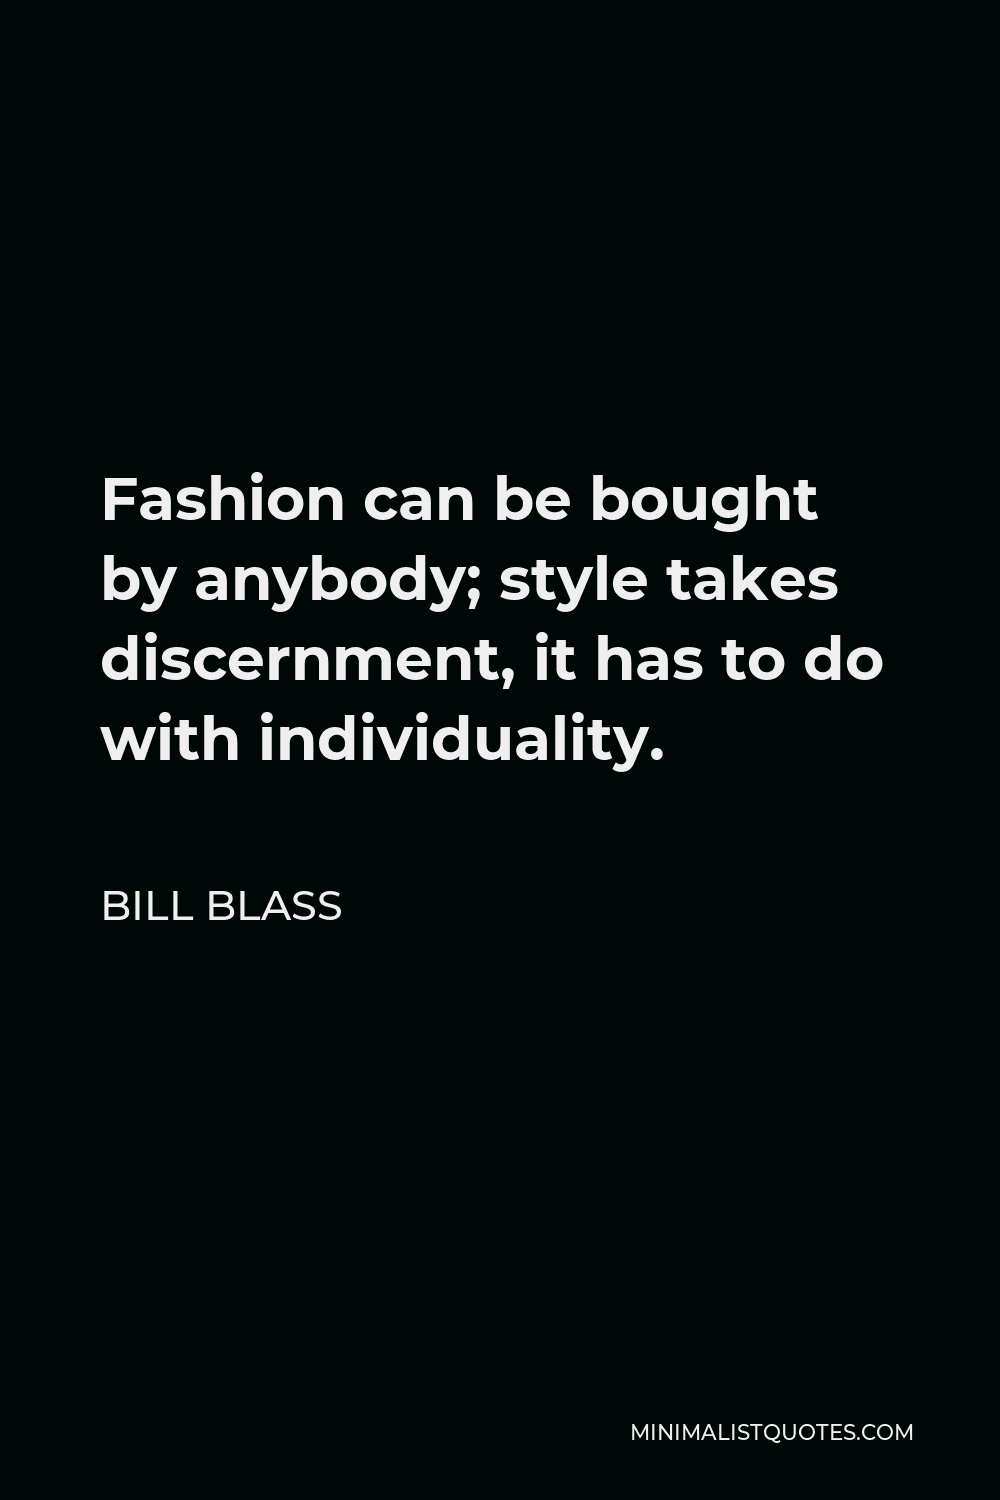 Bill Blass Quote - Fashion can be bought by anybody; style takes discernment, it has to do with individuality.